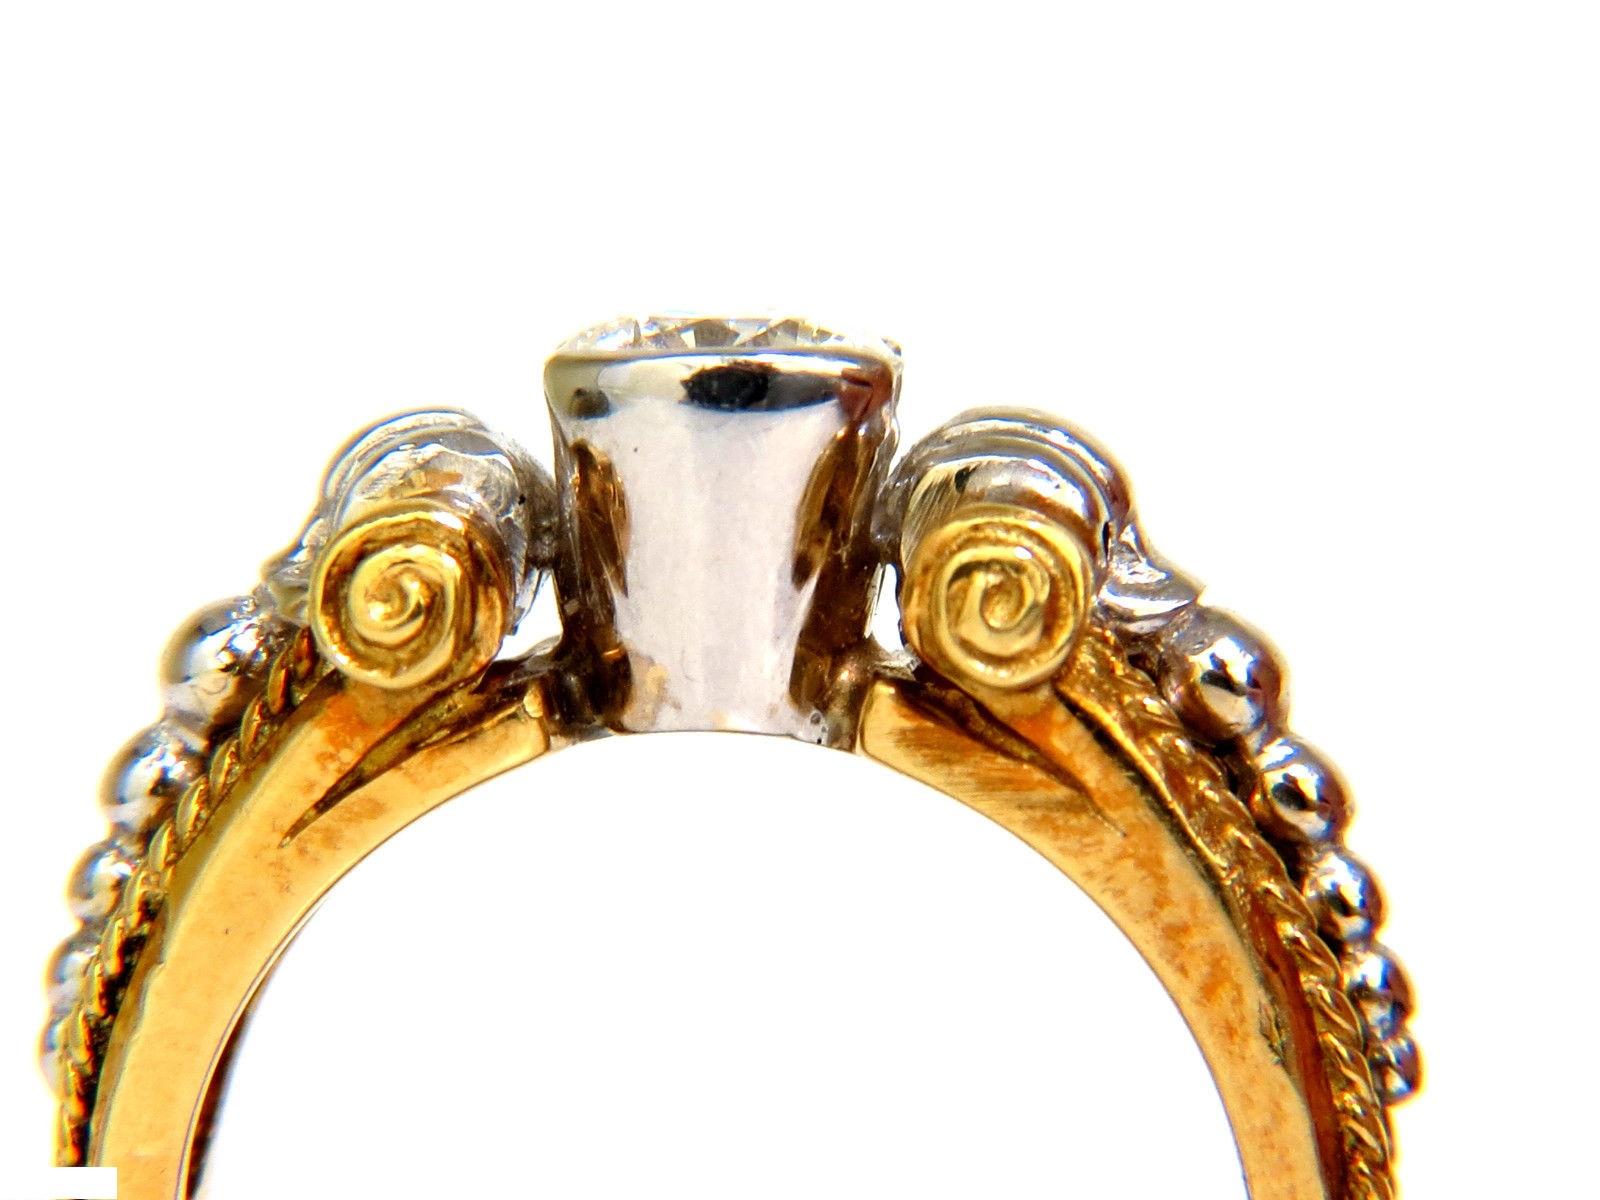 Louis XV Deco at its best

Gorgeous intricate detail

.73ct. round diamond

Full cut, brilliant round

5.7mm diameter

H-color

Vs-2 clarity

9.4 grams

18kt. white and yellow gold.

depth of ring: 6.85mm 

Width: 8.3mm

gorgeous detail and beaded